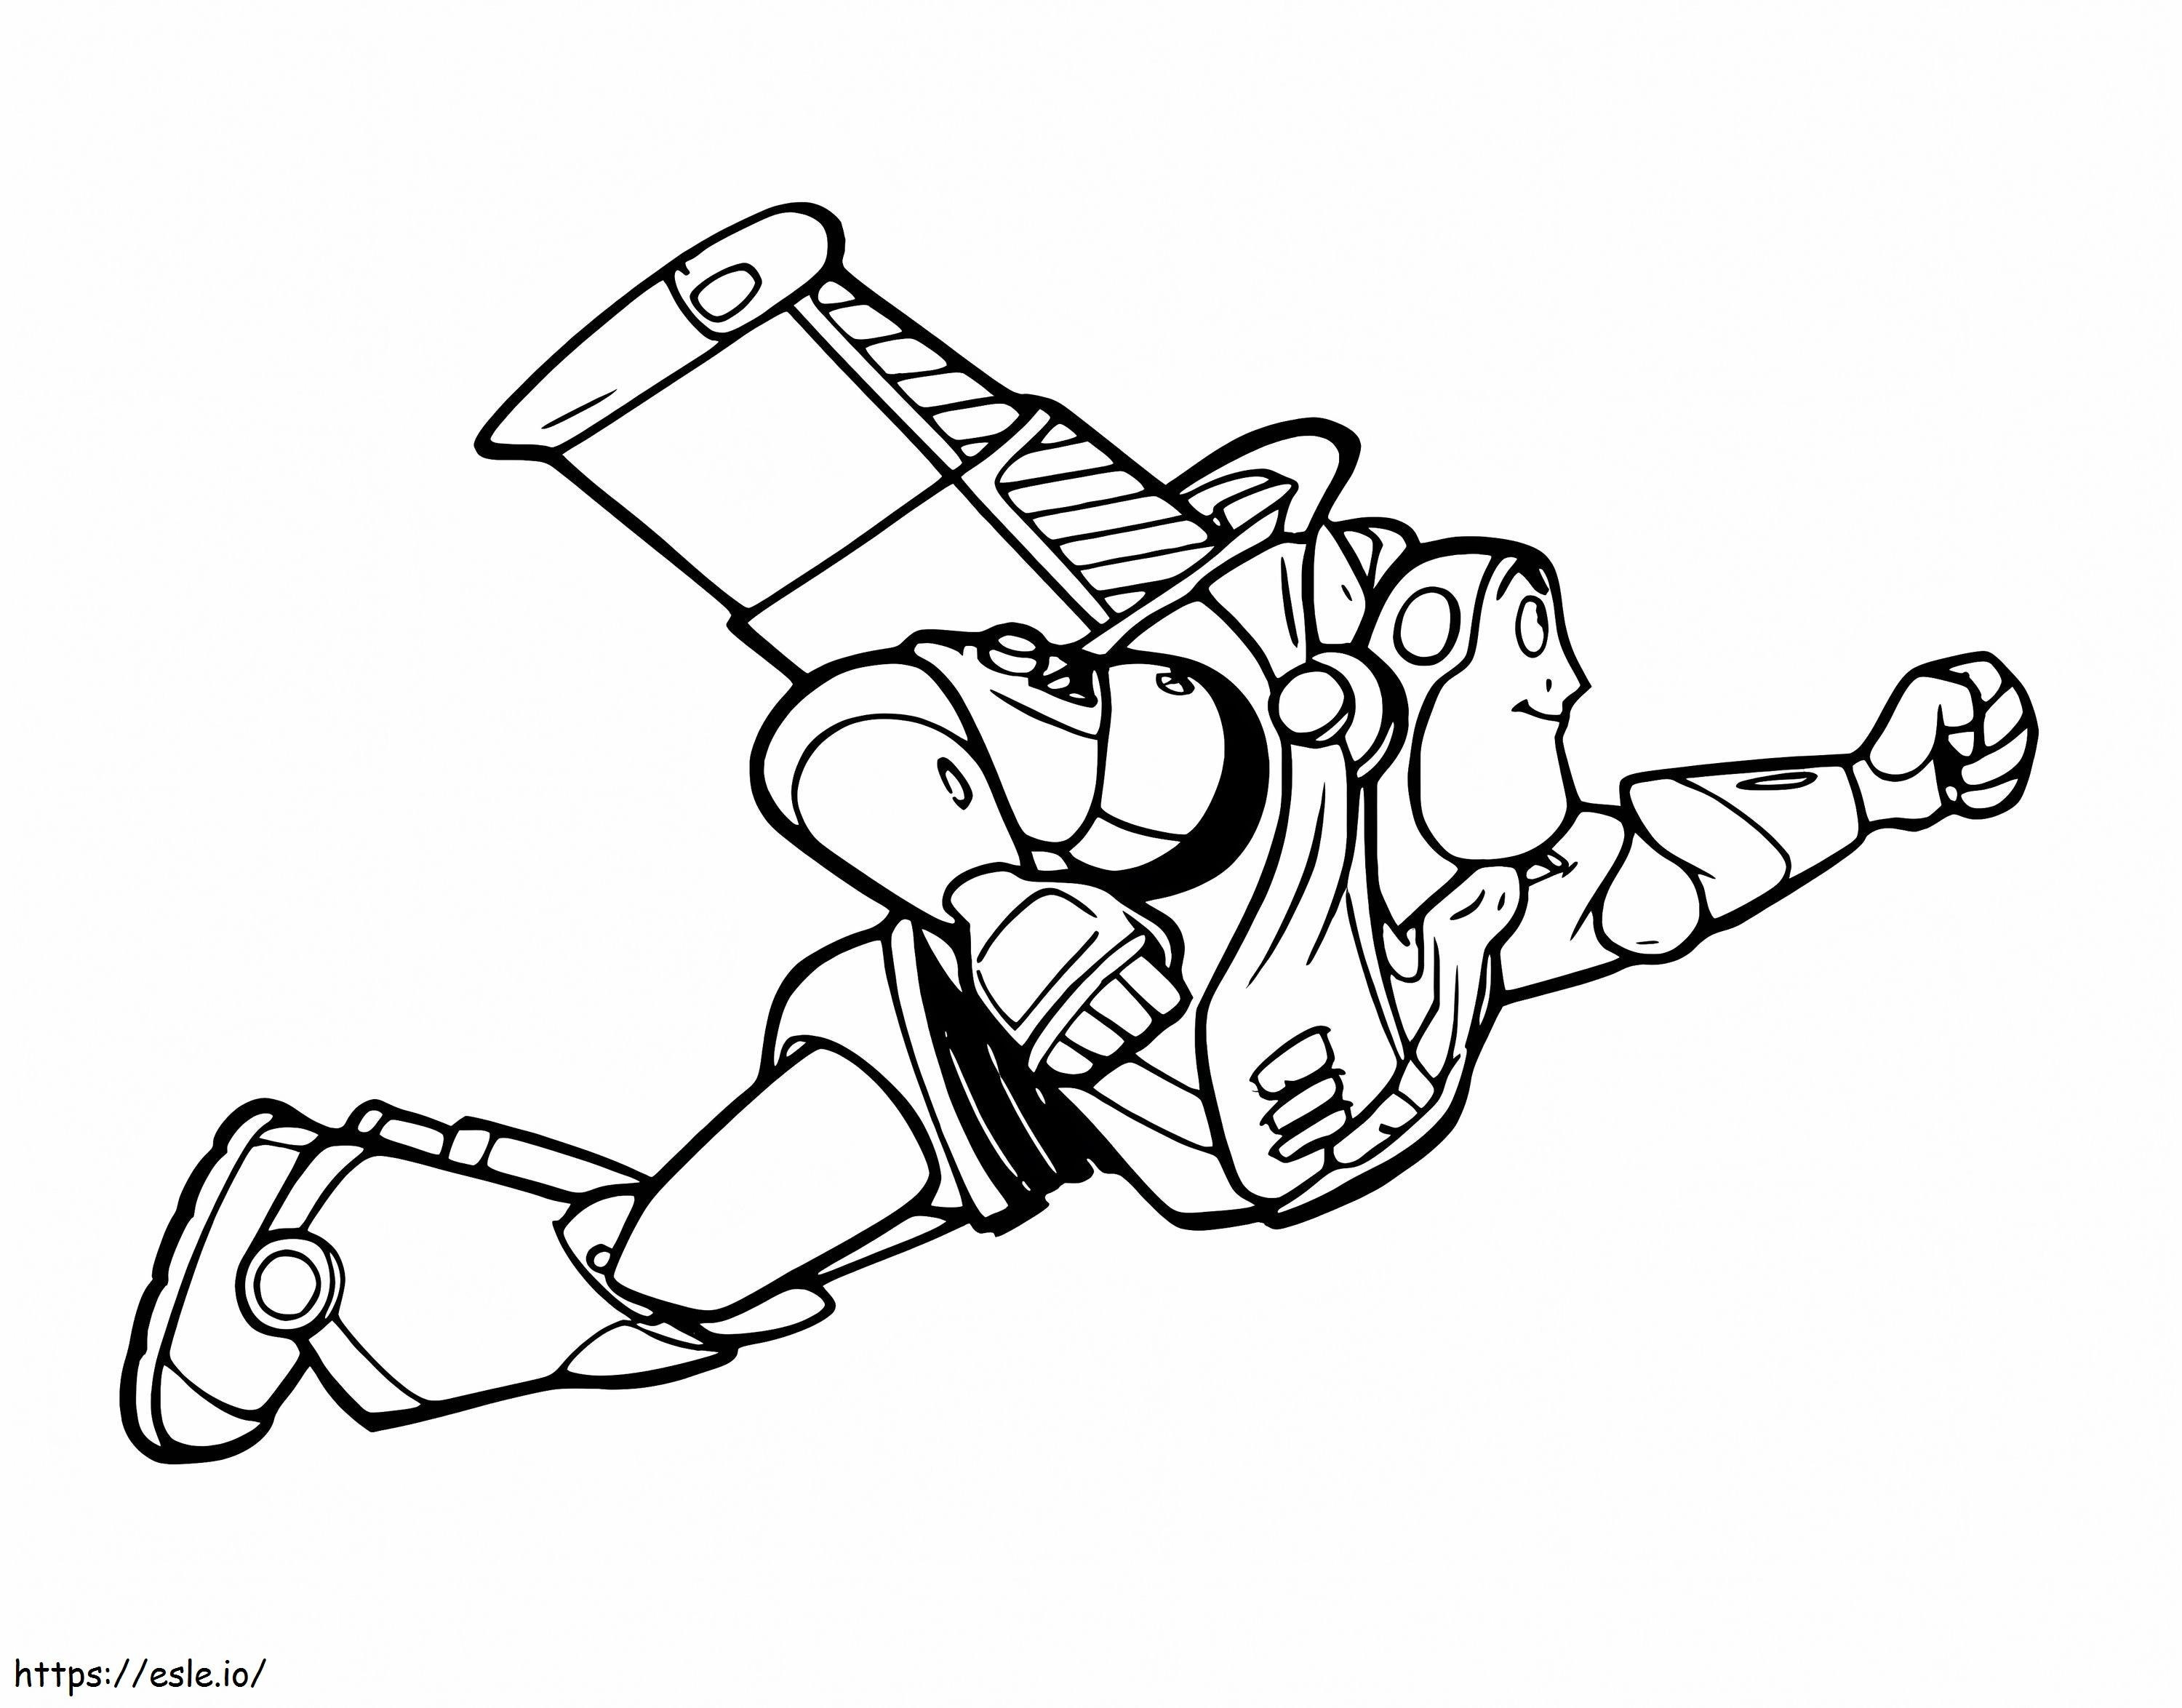 Cute Buzz Lightyear Flying coloring page